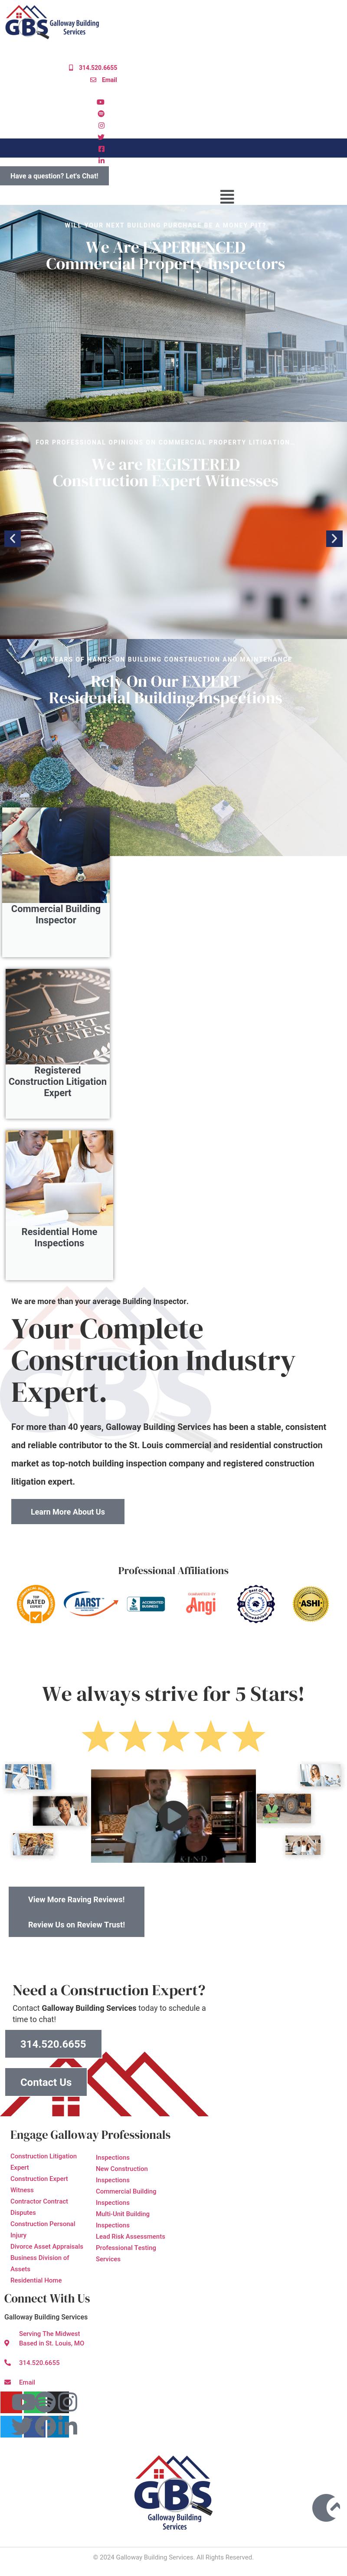 Galloway Building Services Inc. - Ballwin MO Lawyers